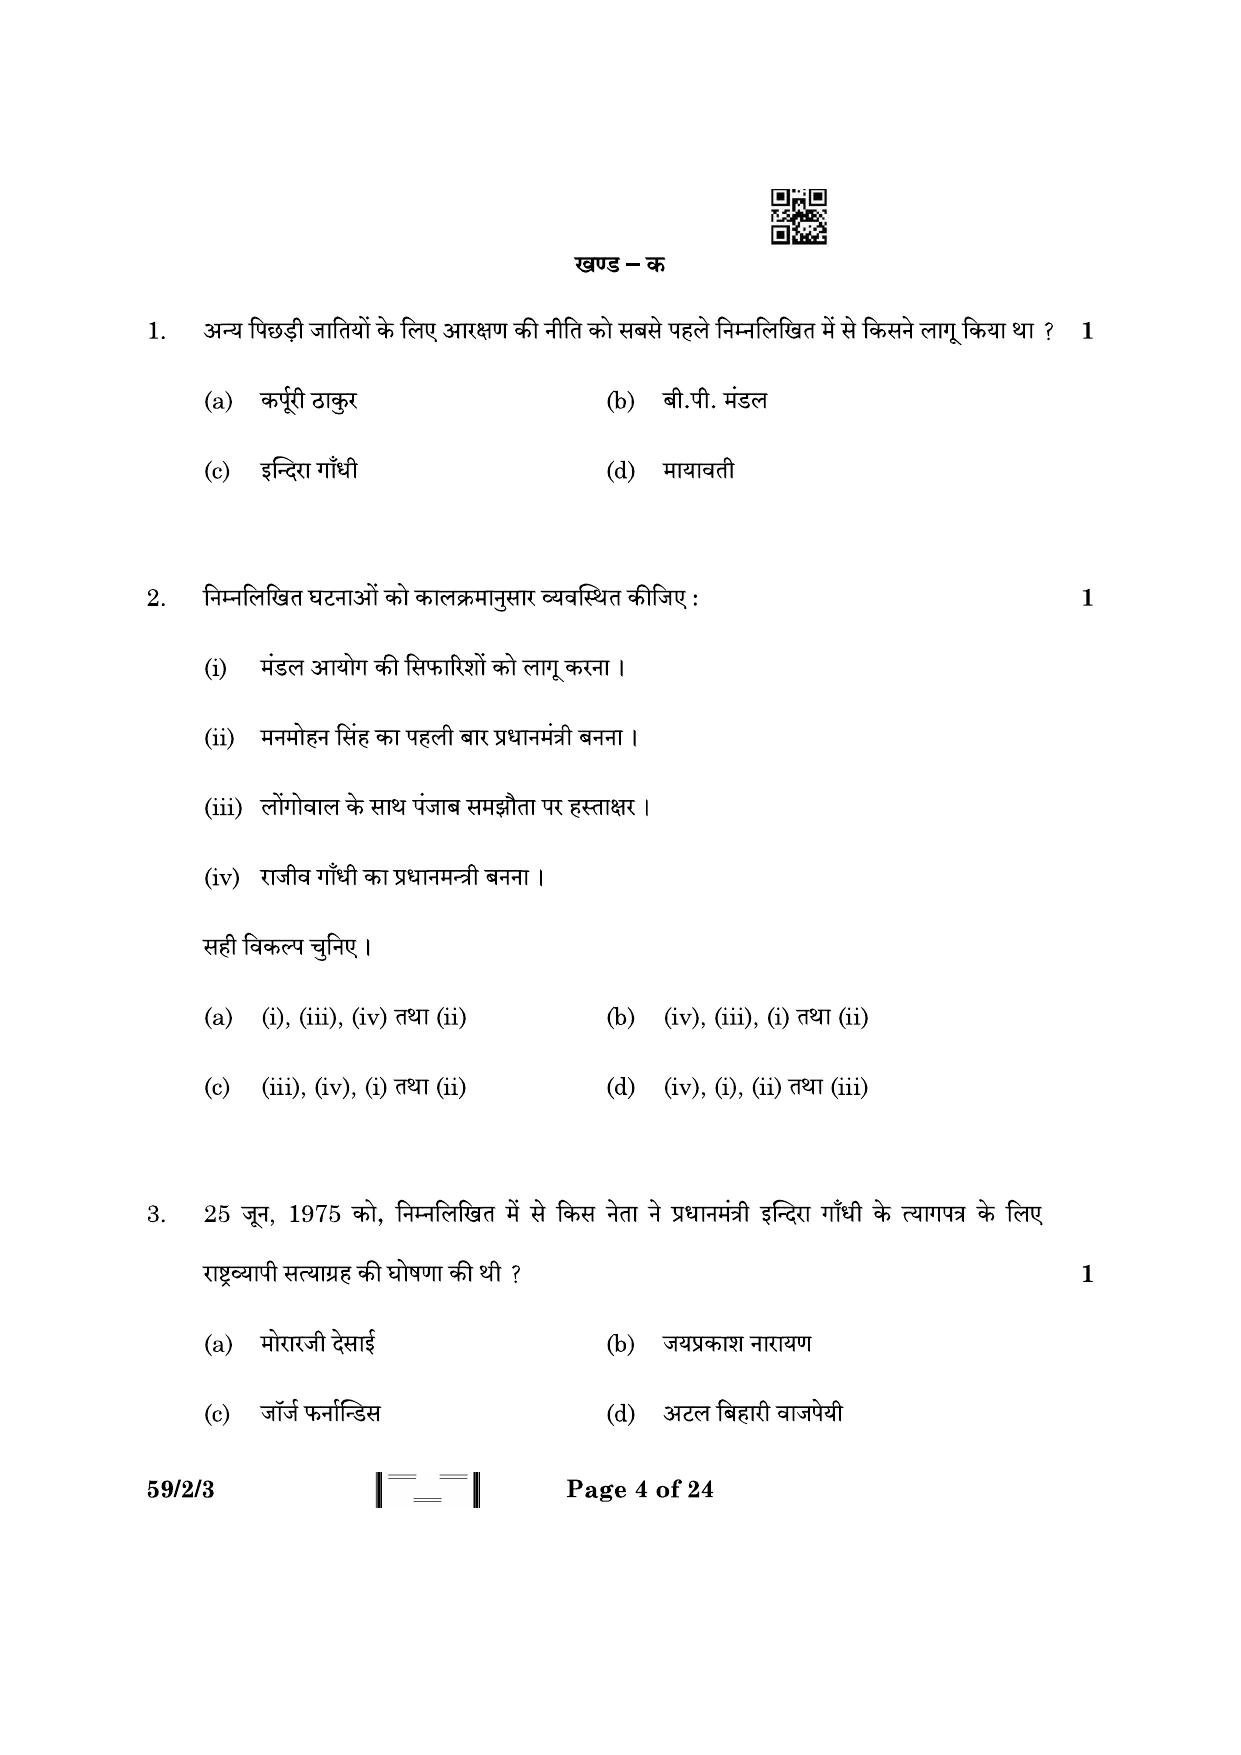 CBSE Class 12 59-2-3 Political Science 2023 Question Paper - Page 4